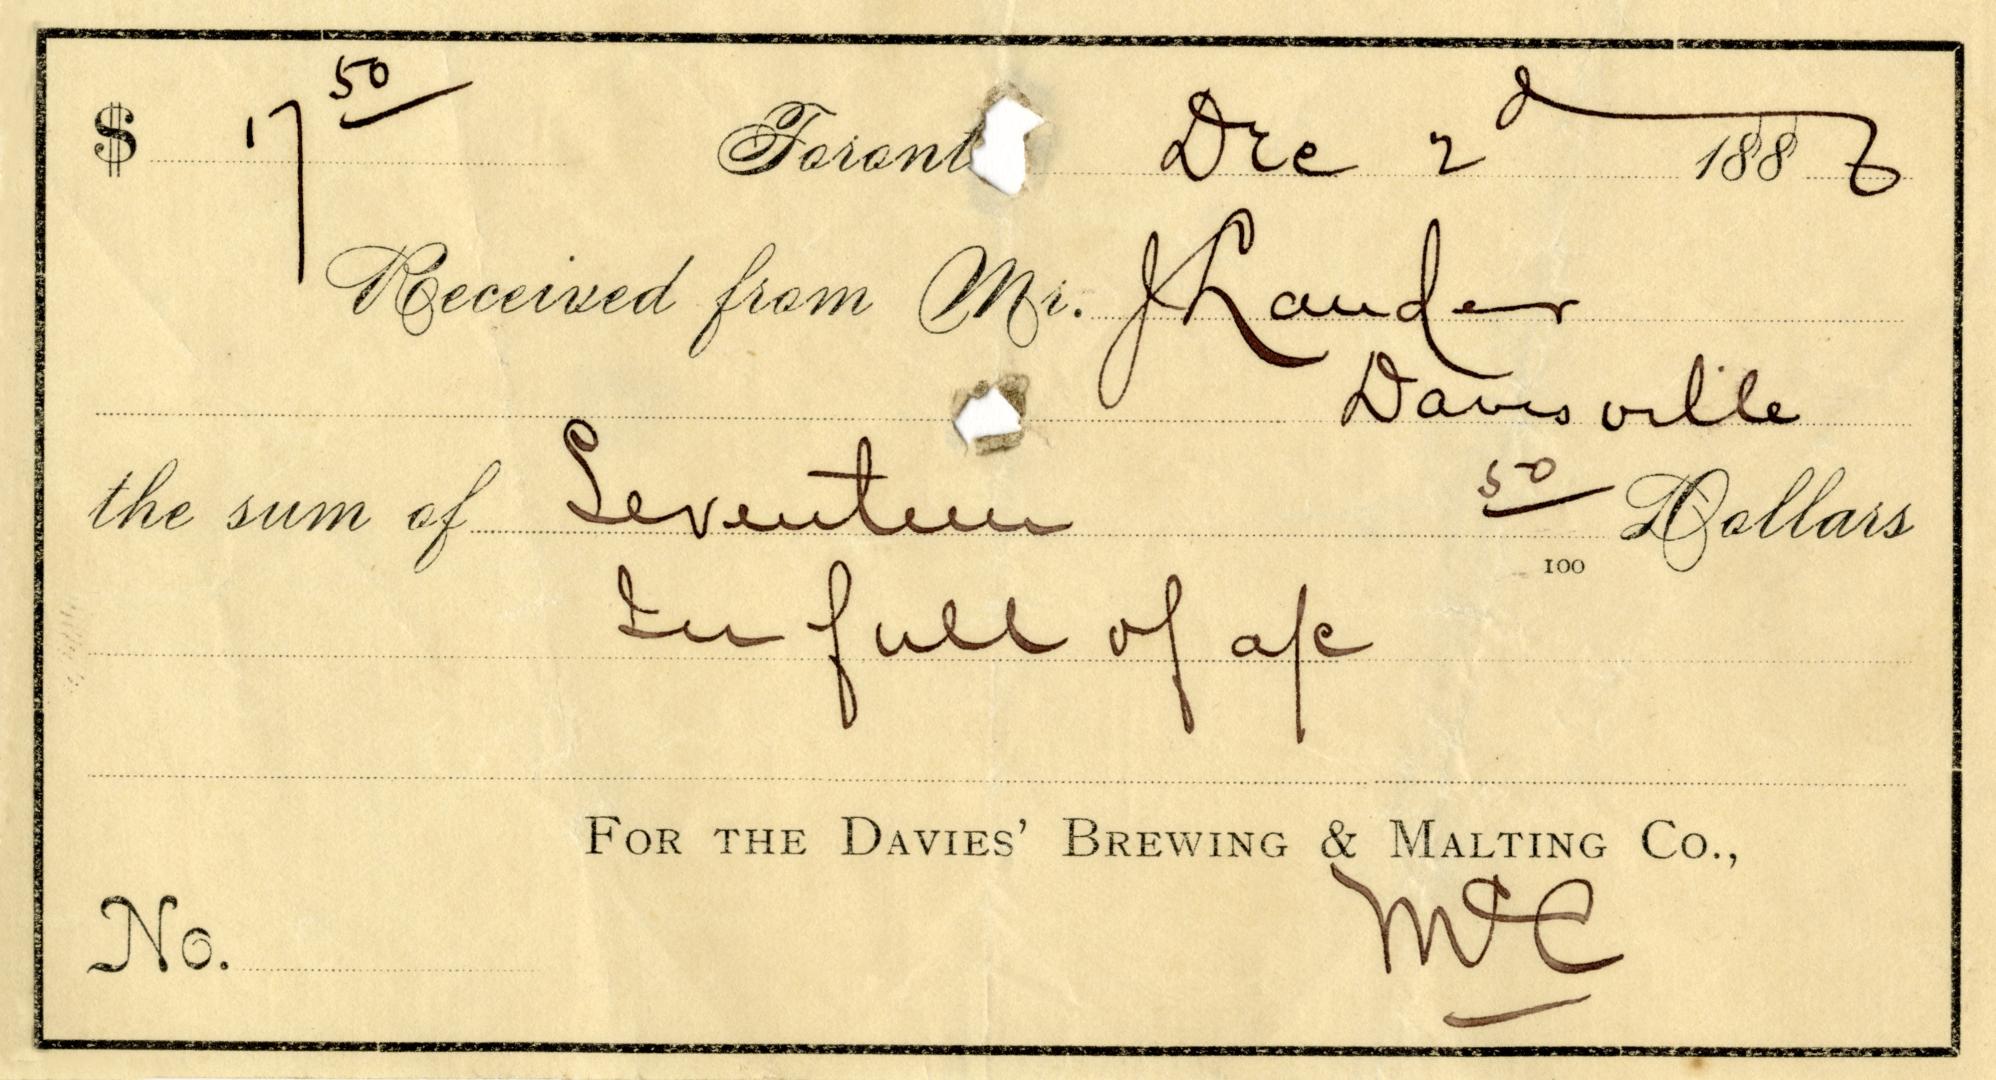 Received from ... for the Davies' Brewing & Malting Co.